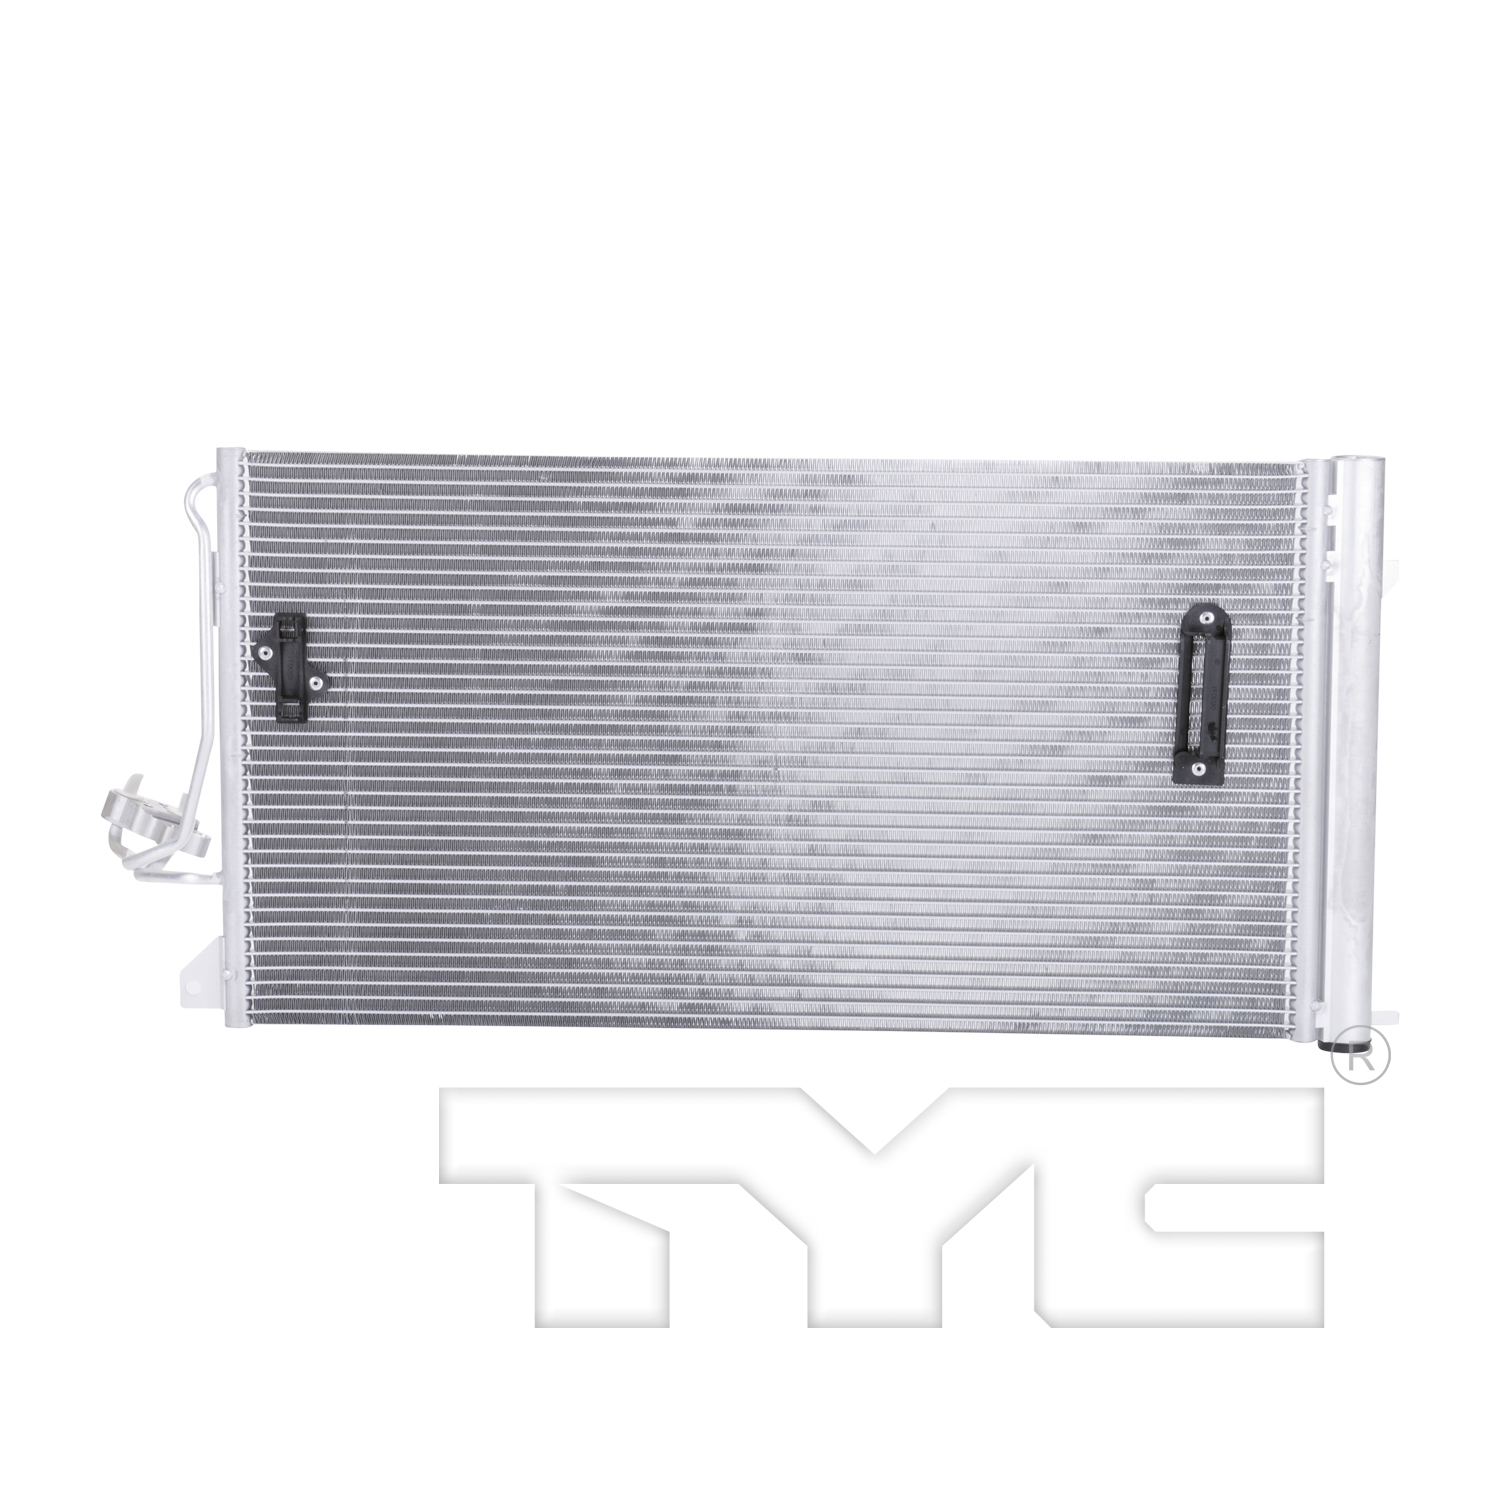 Aftermarket AC CONDENSERS for VOLKSWAGEN - TOUAREG, TOUAREG,04-07,Air conditioning condenser